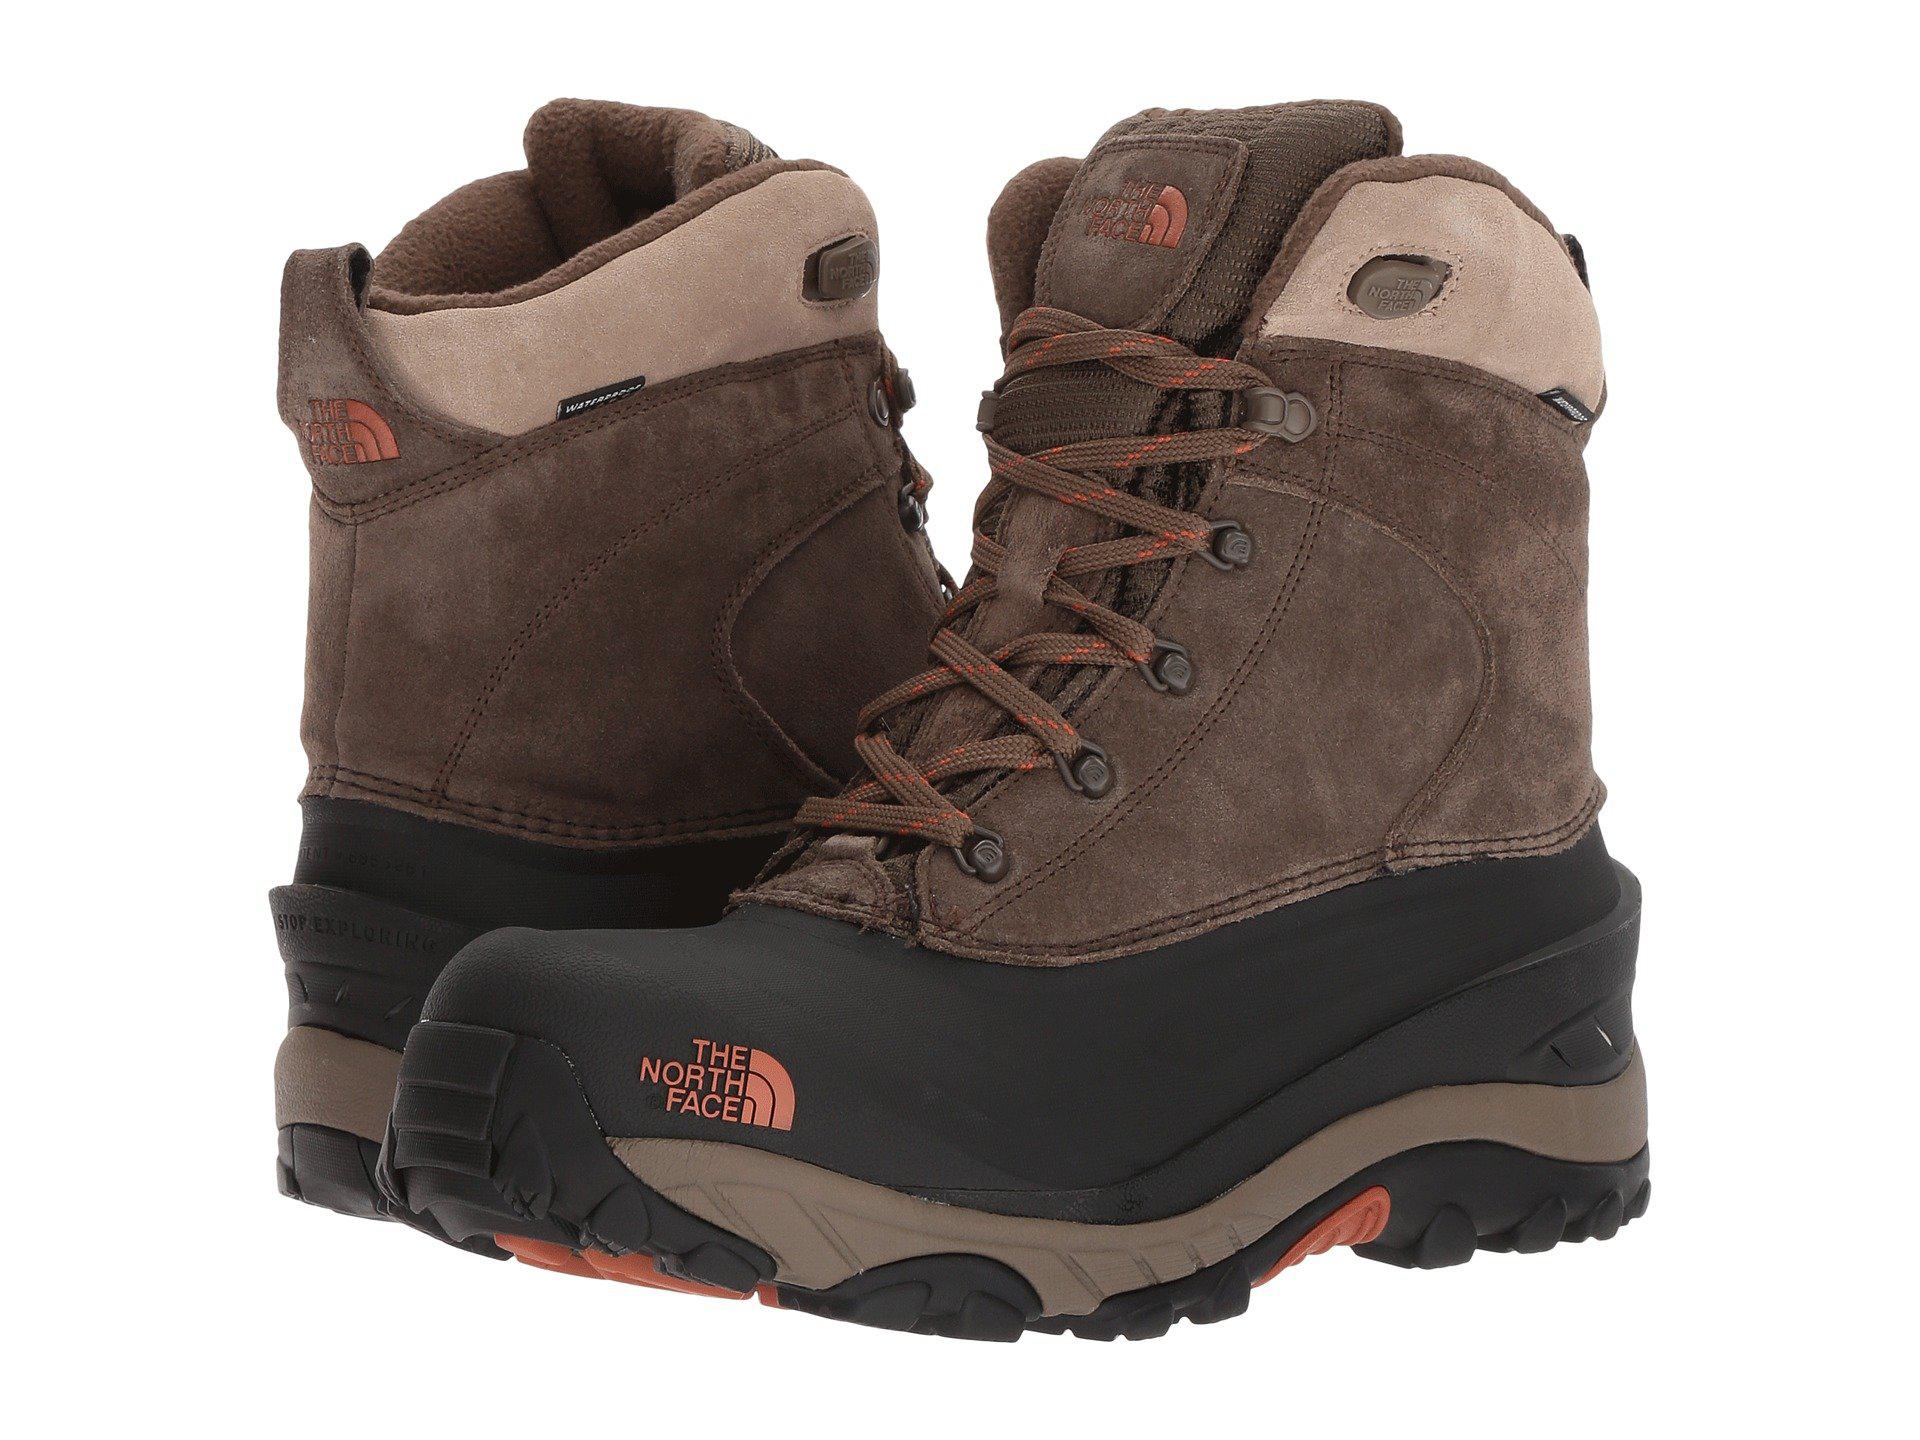 The North Face Chilkat Iii 200g Waterproof Winter Boots in Brown for ...